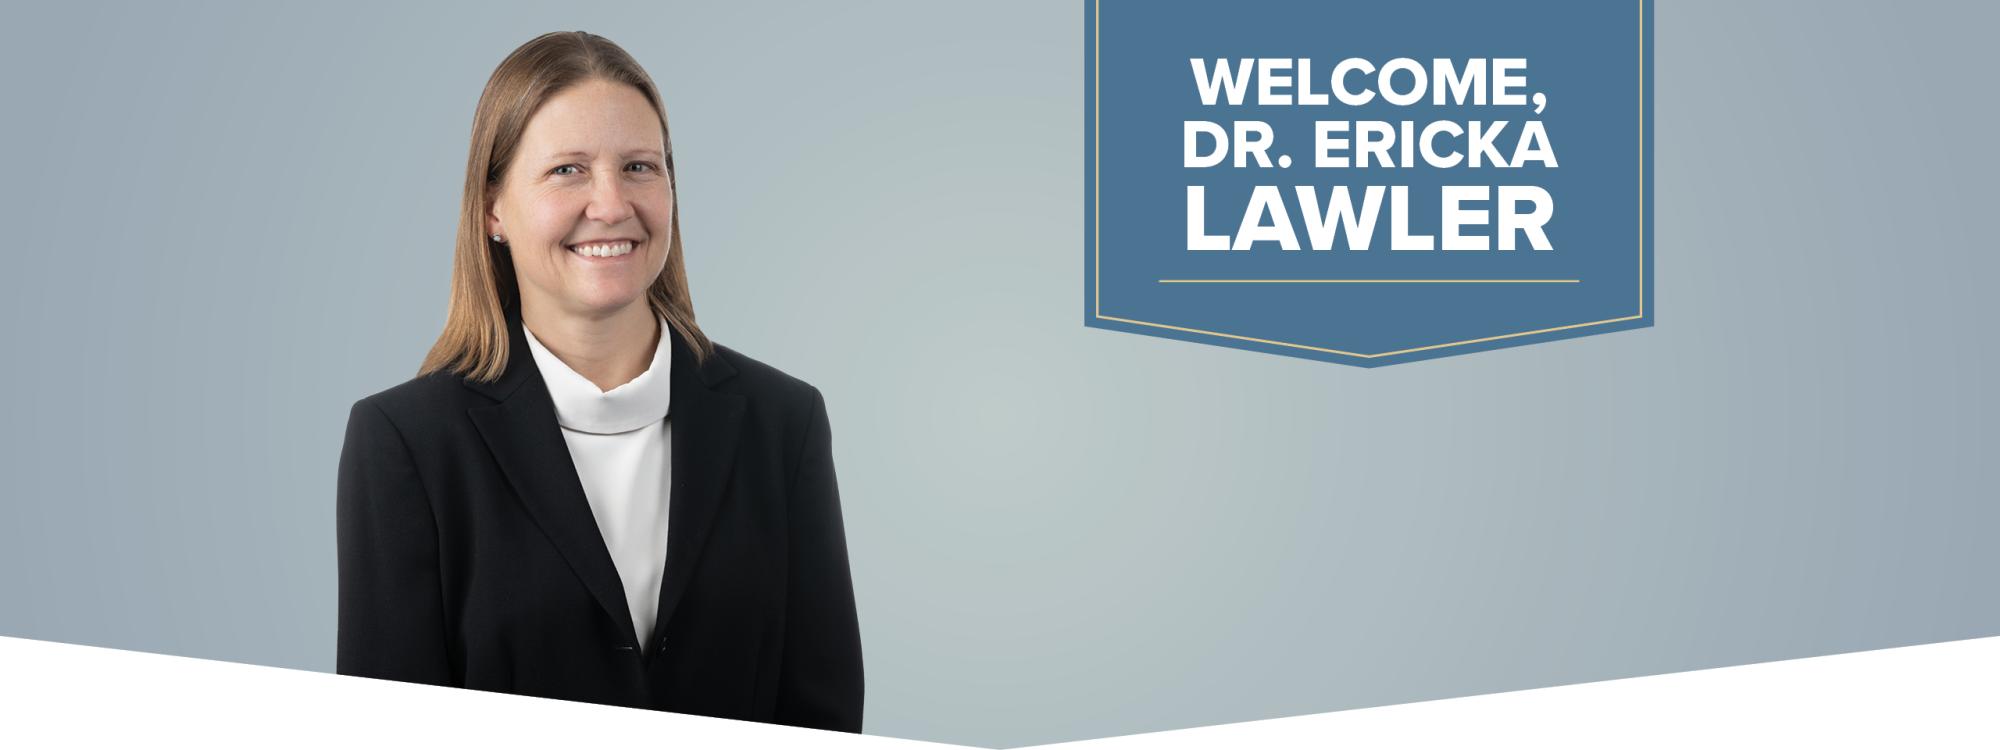 Welcome, Dr. Ericka Lawler